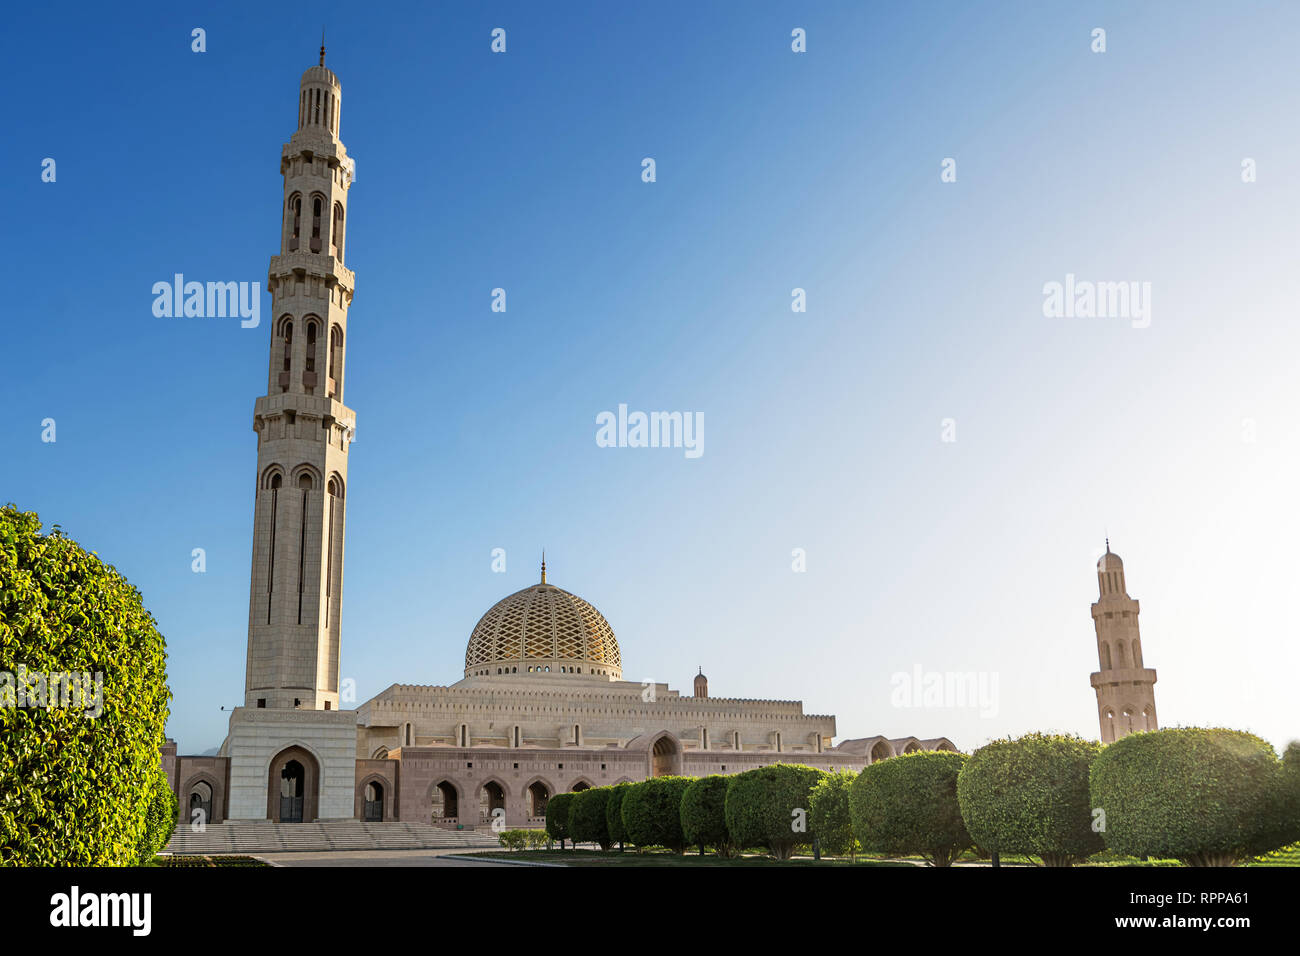 Dome and minaret of Sultan Qaboos Grand Mosque in Muscat (Oman) Stock Photo